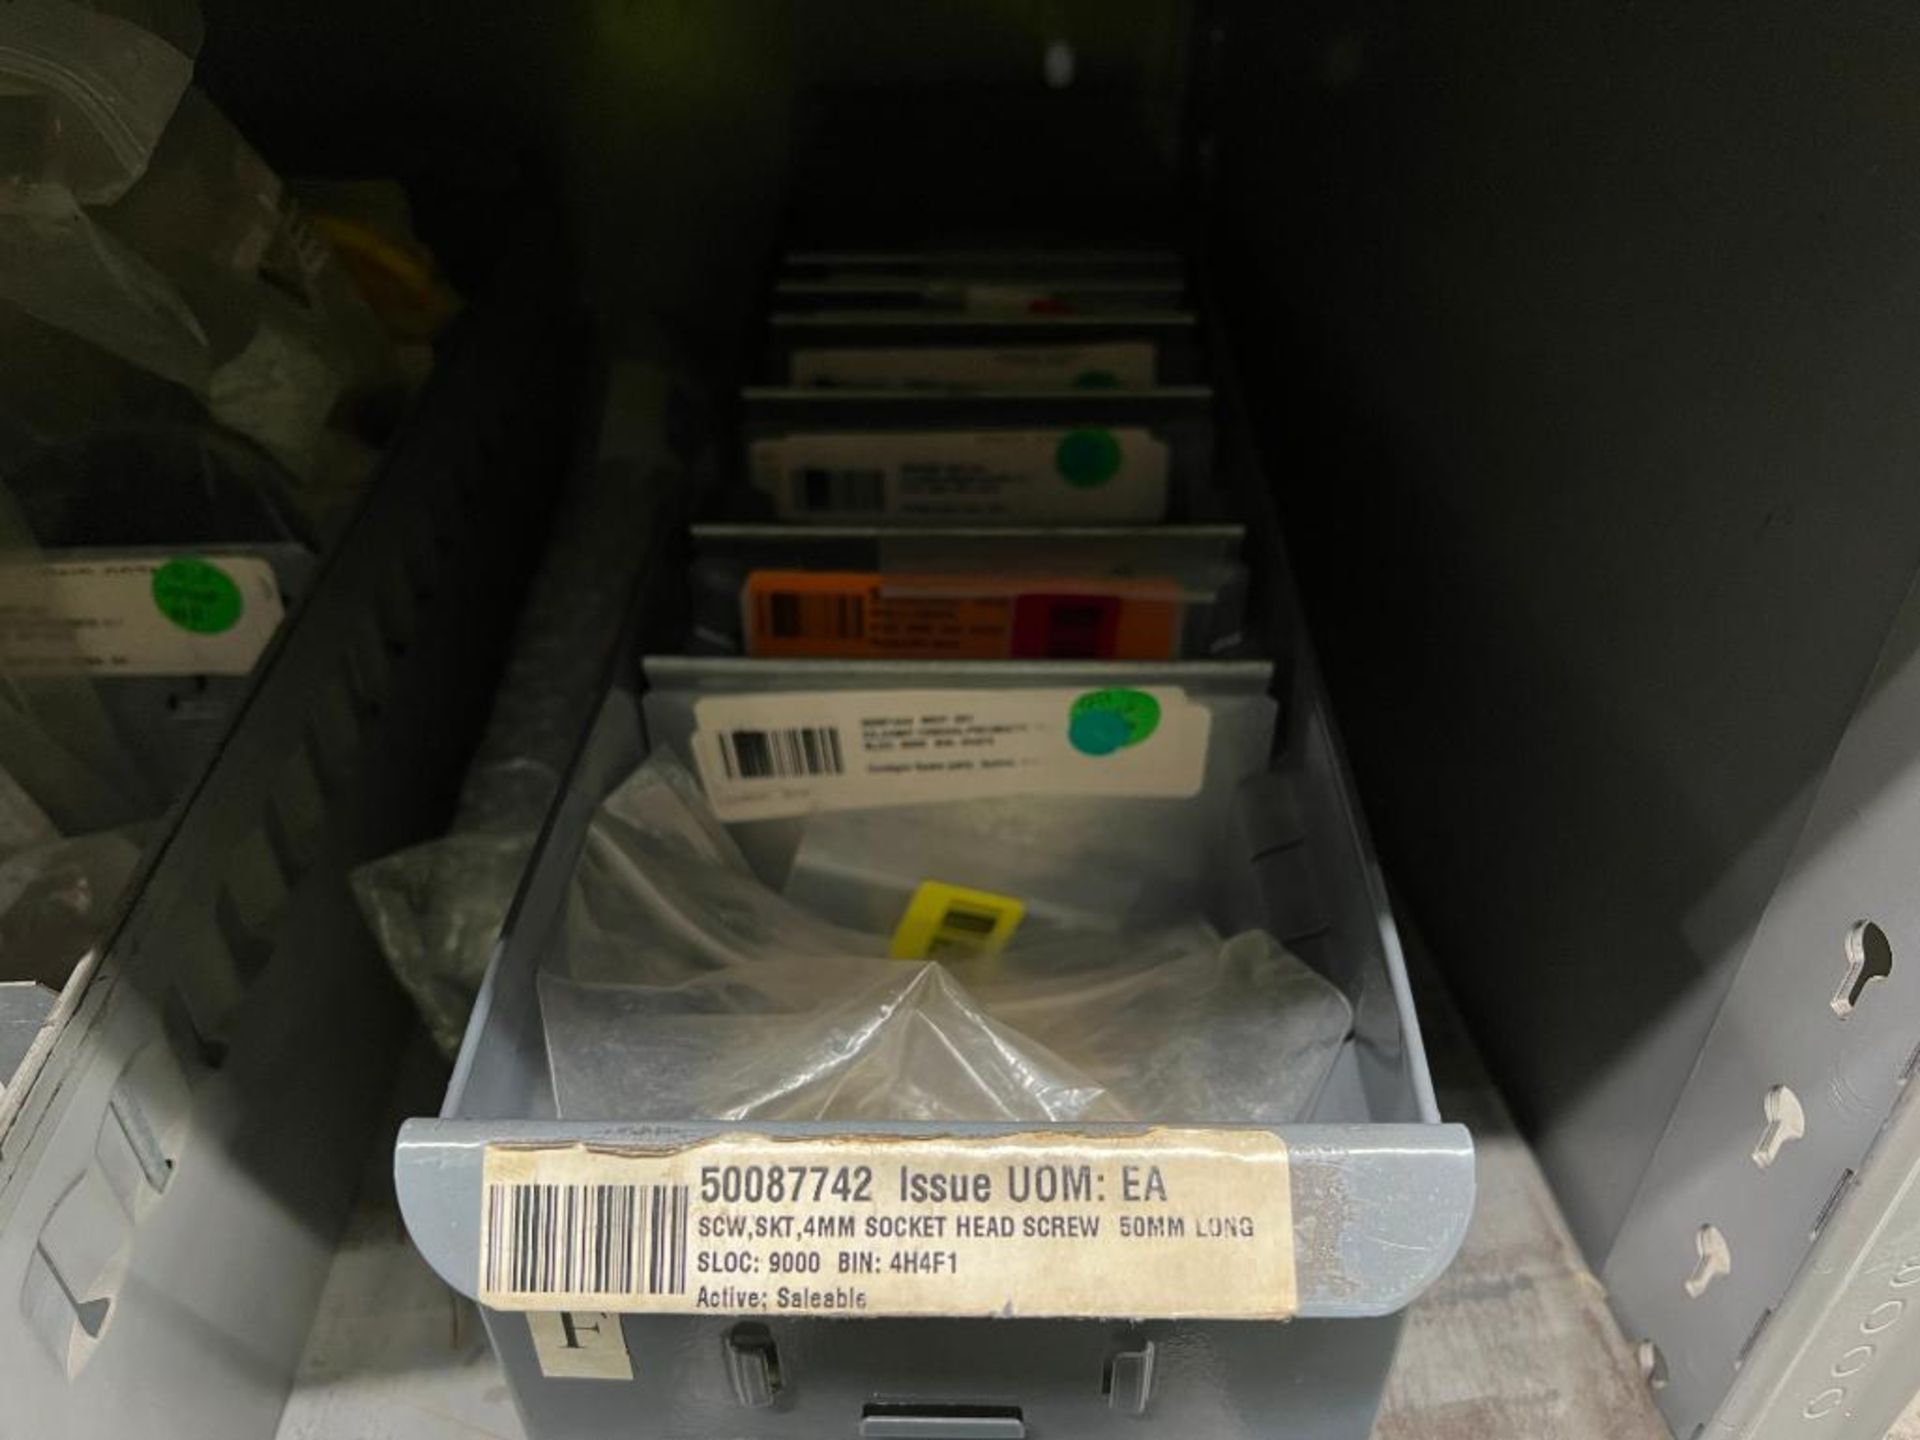 contents of gray shelving units to include, bearings, shafts, filters, fuses, pneumatic scale parts, - Image 24 of 141